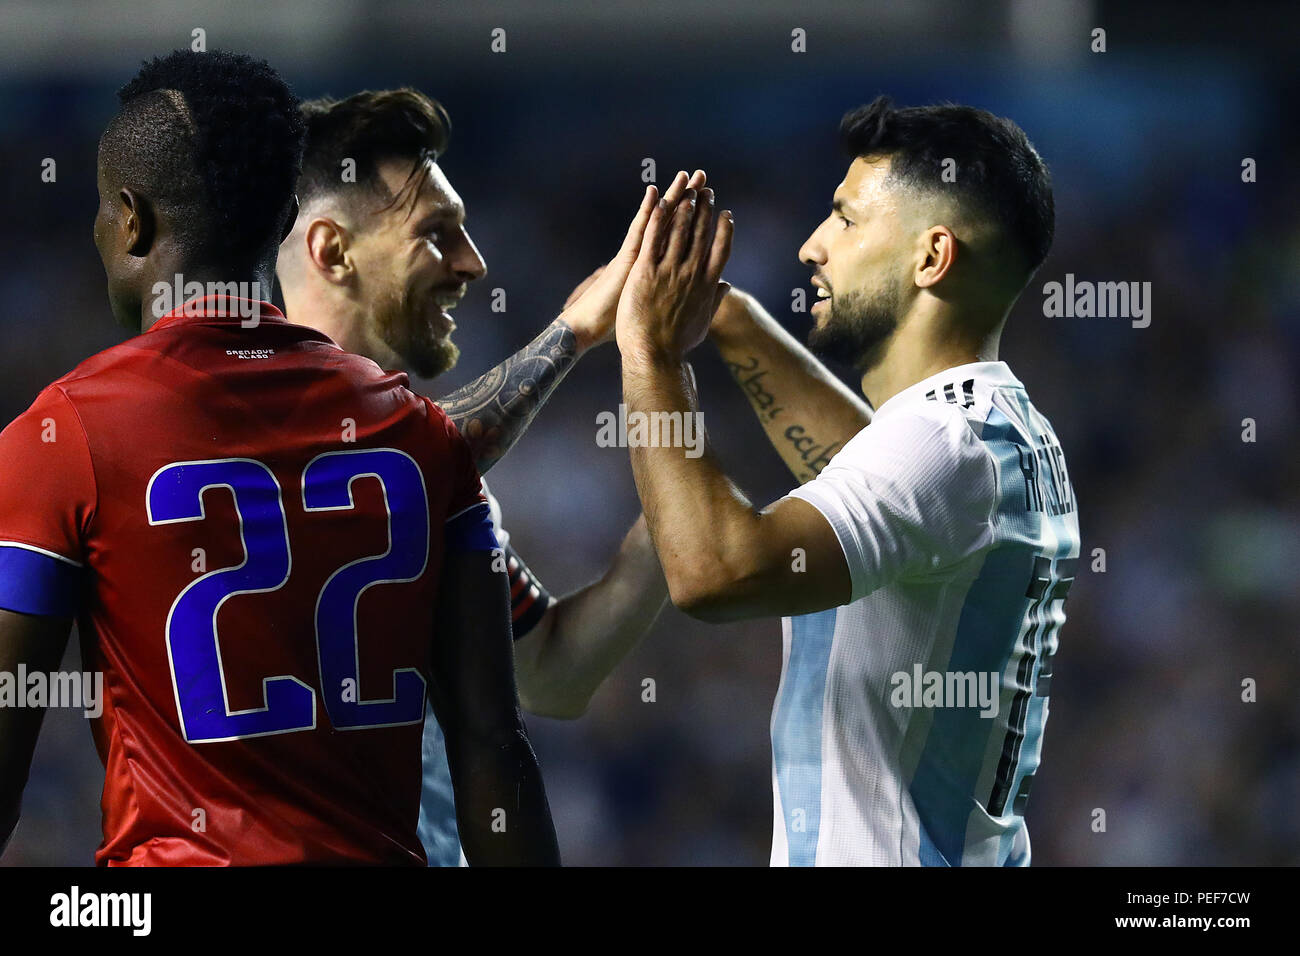 BUENOS AIRES, ARGENTINA - MAY 2018: Lionel Messi and Sergio aguero celebrating the goal Stock Photo